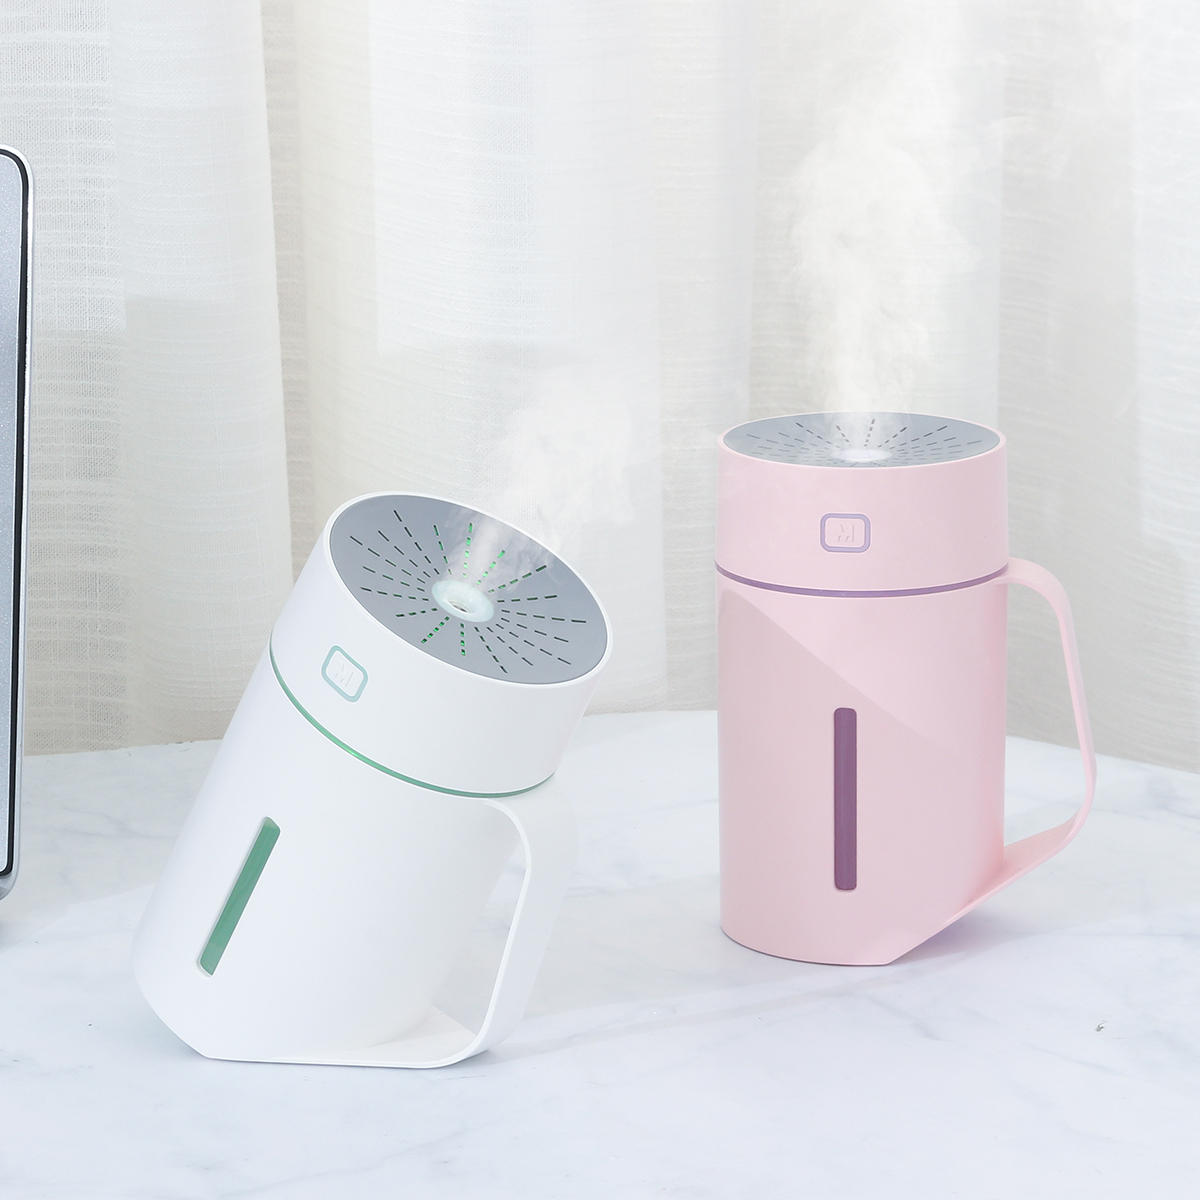 USB Battery Portable Mini 7 Color LED Air Humidifier Diffuser 2 Gear Wired Wireless Night Light Humidifier